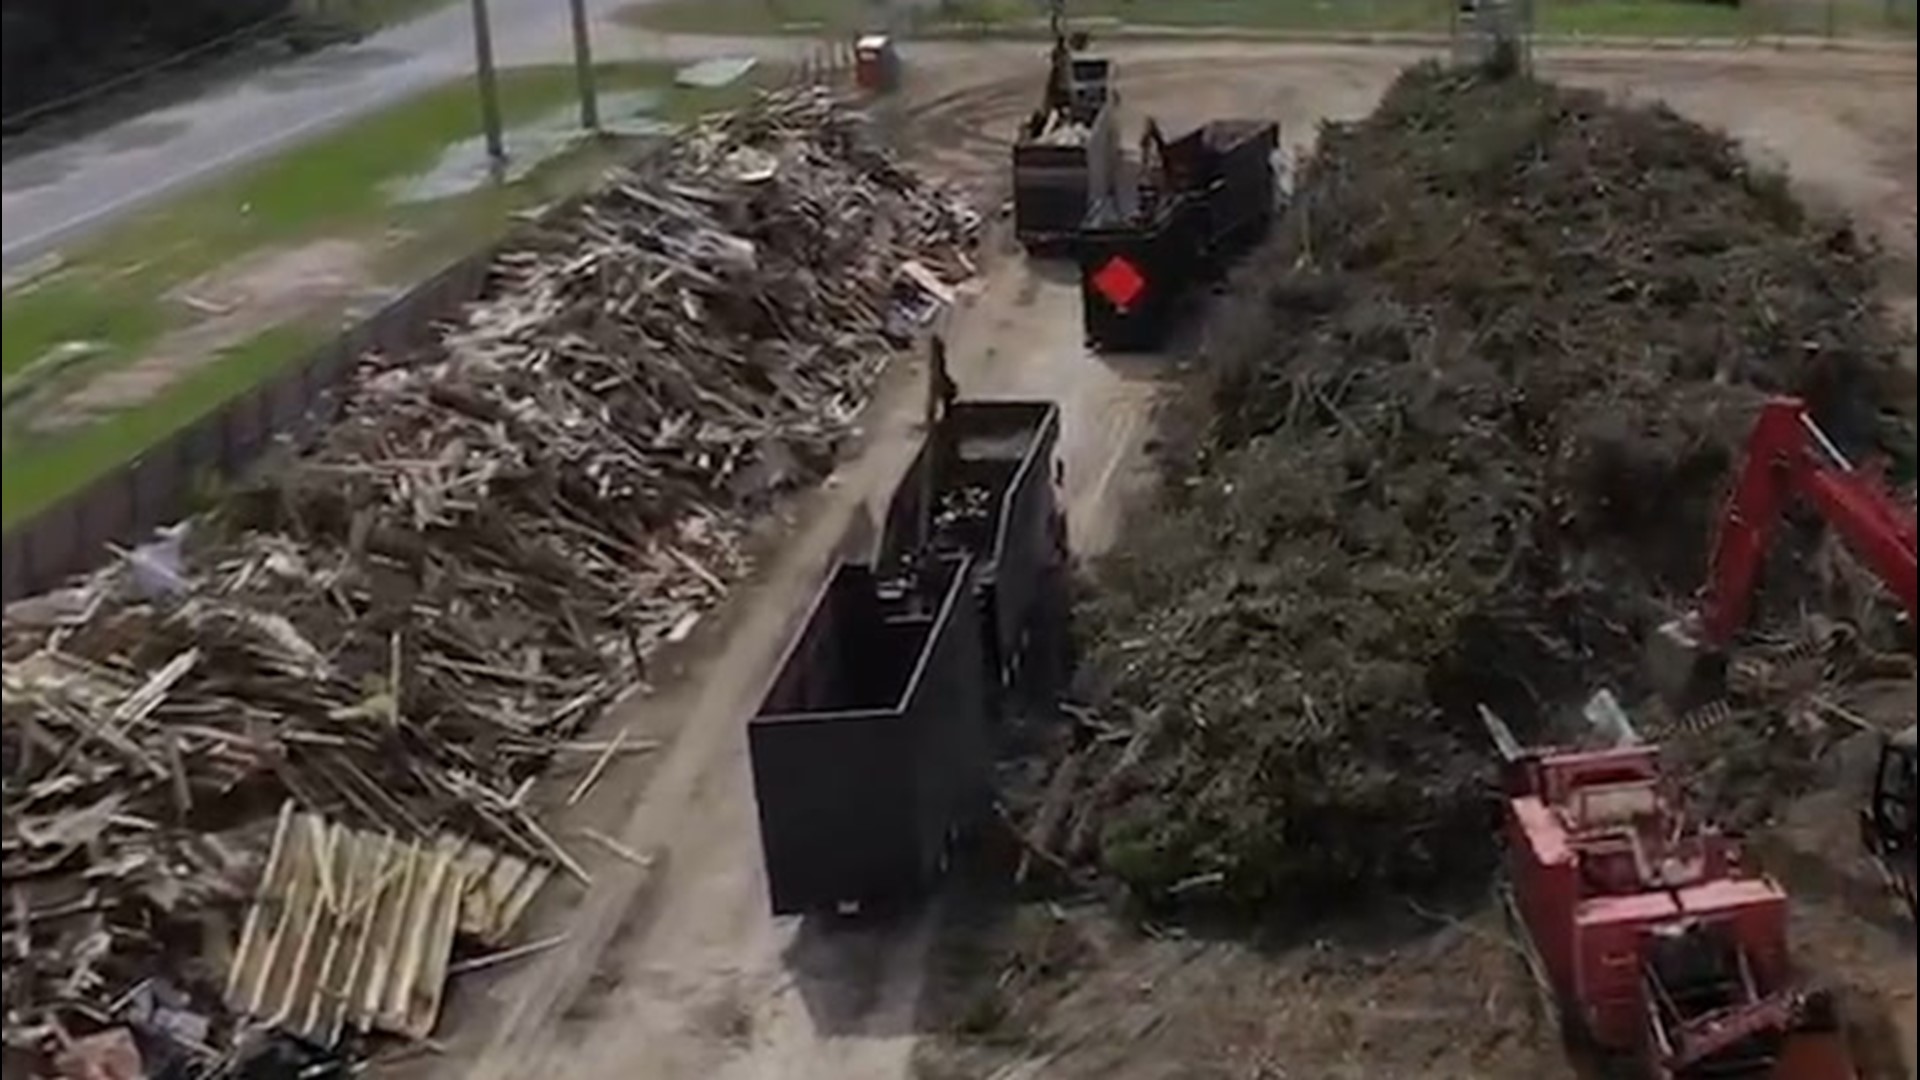 The city of Orange Beach, Alabama, has been busy cleaning up debris since Hurricane Sally lashed the Gulf Coast on Sept. 16, with officials saying more than 1,700 truckloads of debris have been removed.